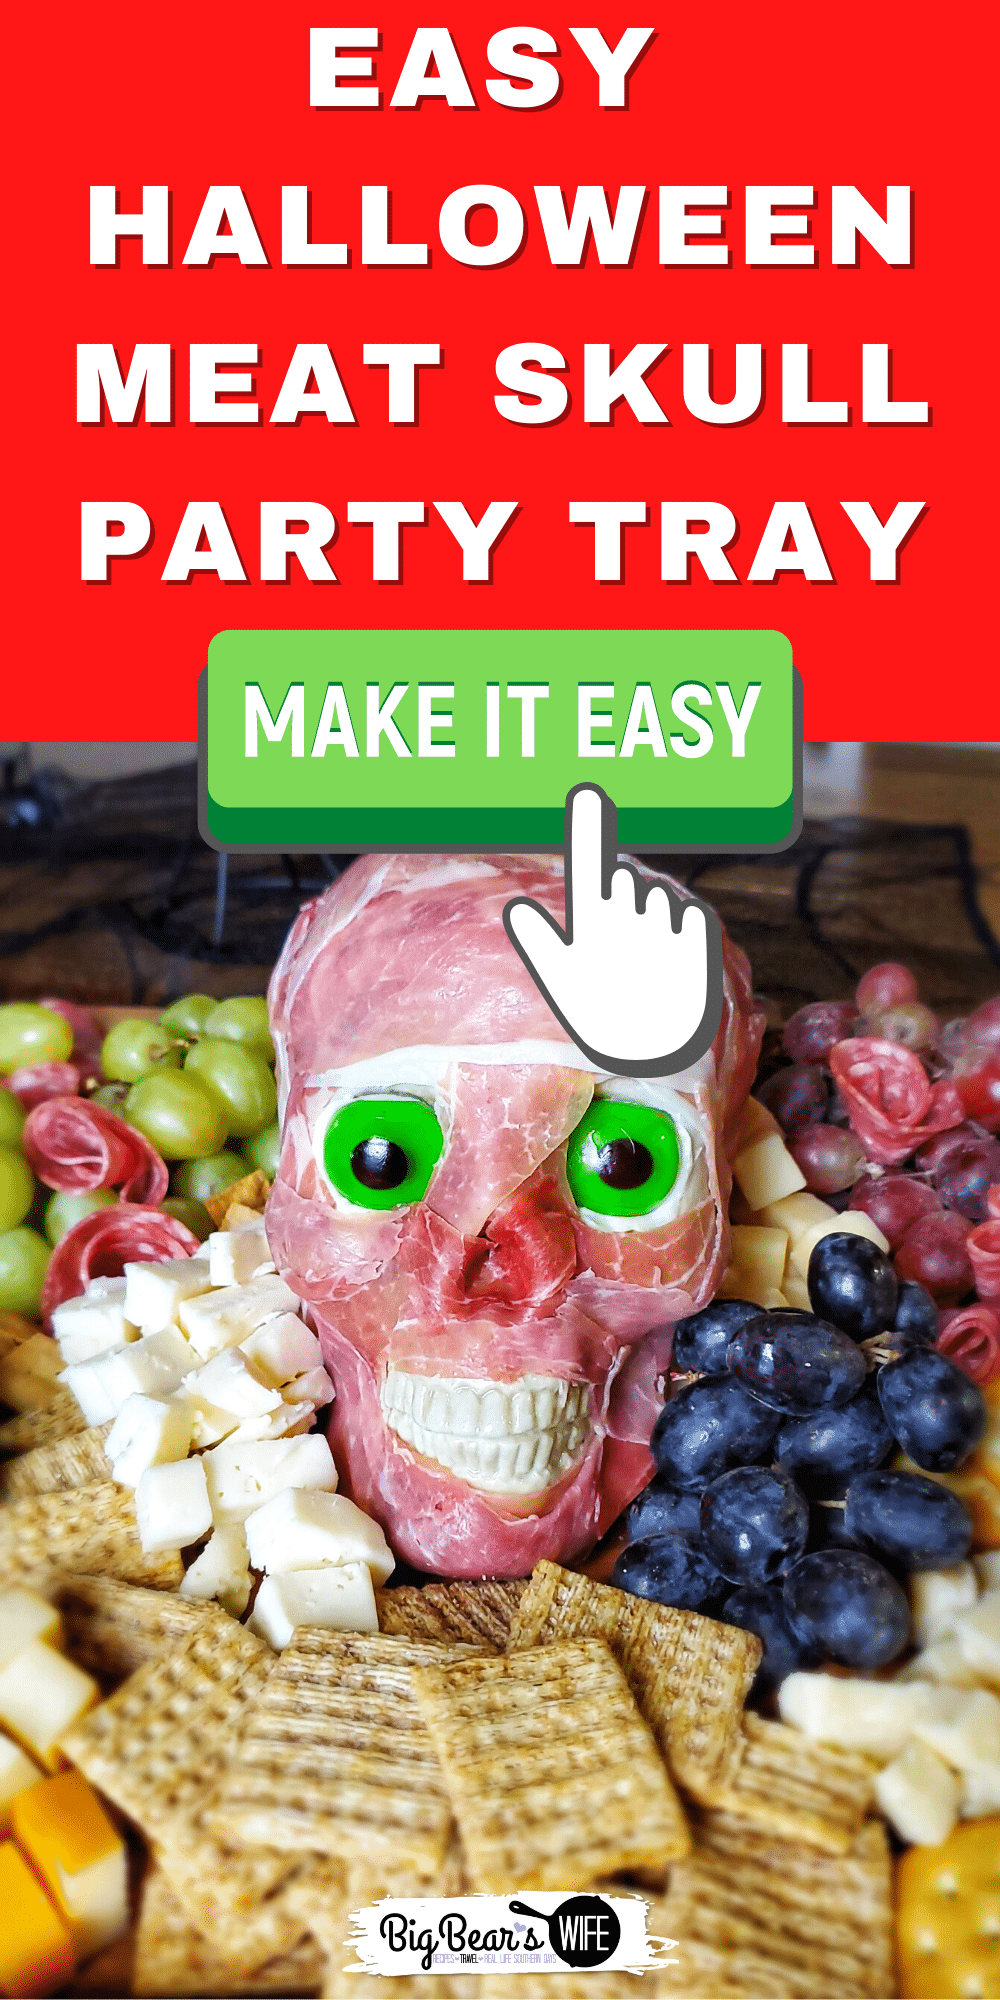 Easy Meat Skull Party Tray - a Halloween charcuterie board with a scary skull covered in prosciutto, surrounded by grapes, cheese and salami is the perfect board for Halloween! via @bigbearswife